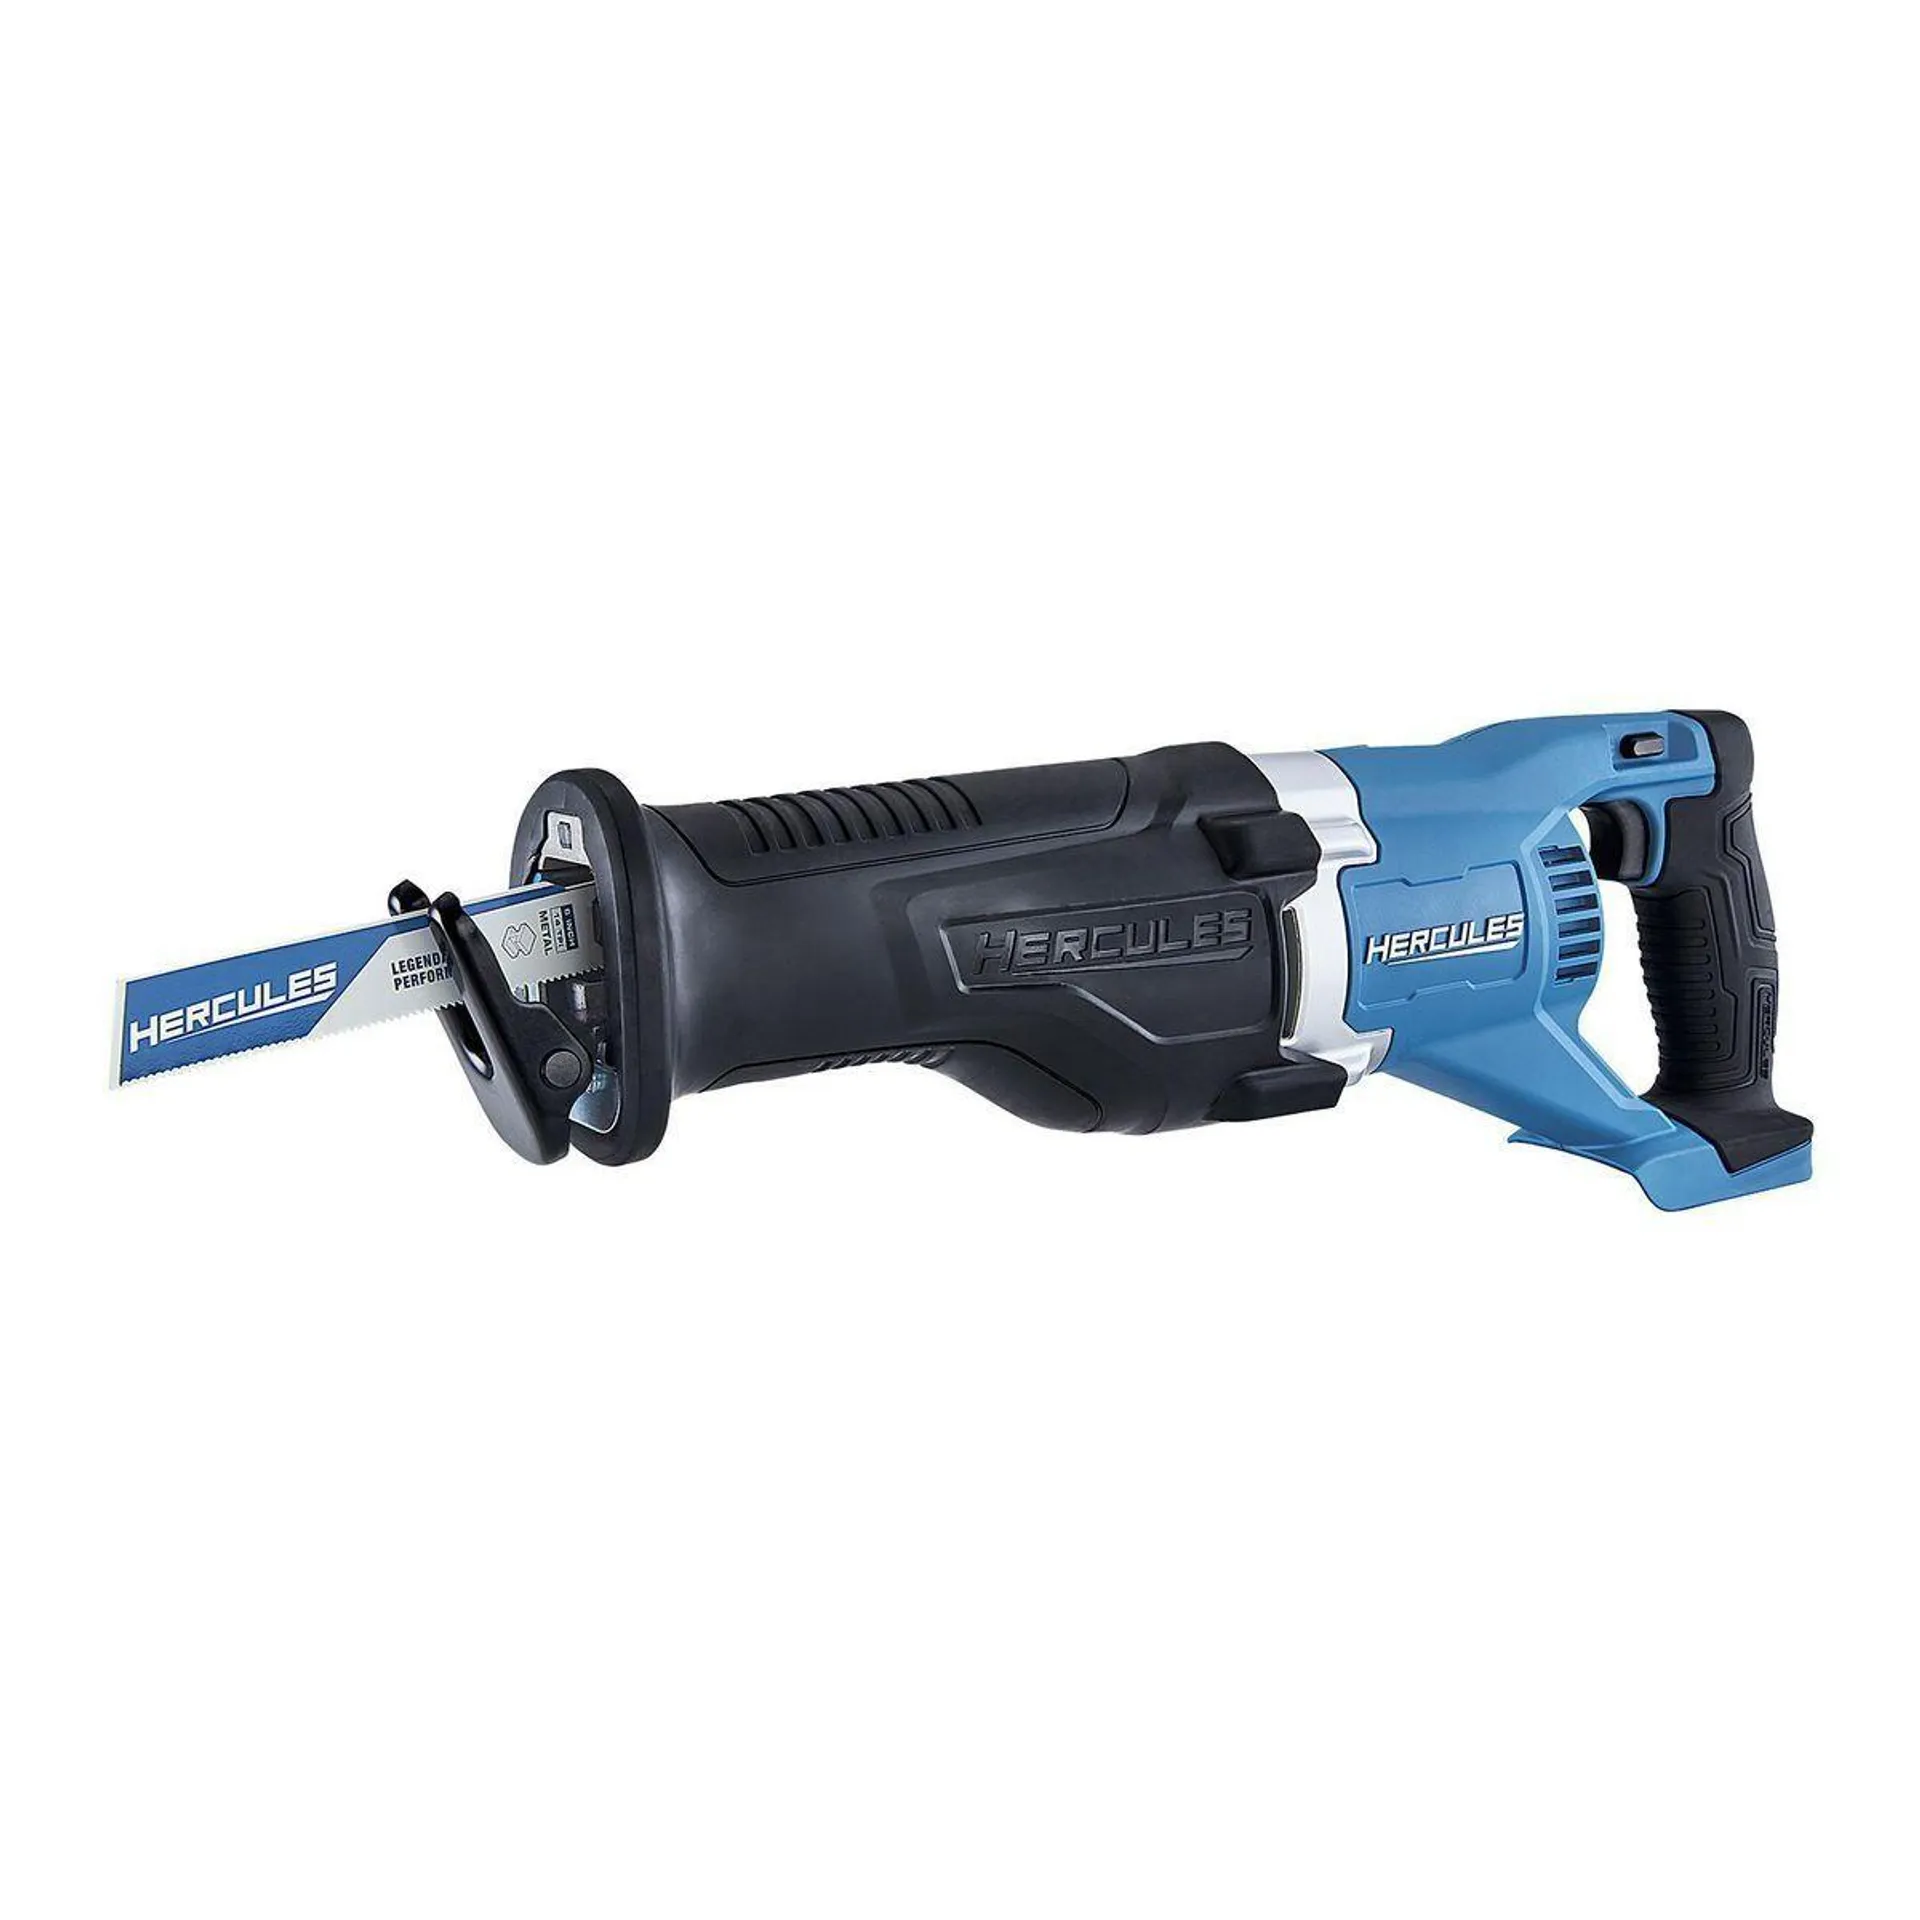 HERCULES 20V Cordless Reciprocating Saw - Tool Only